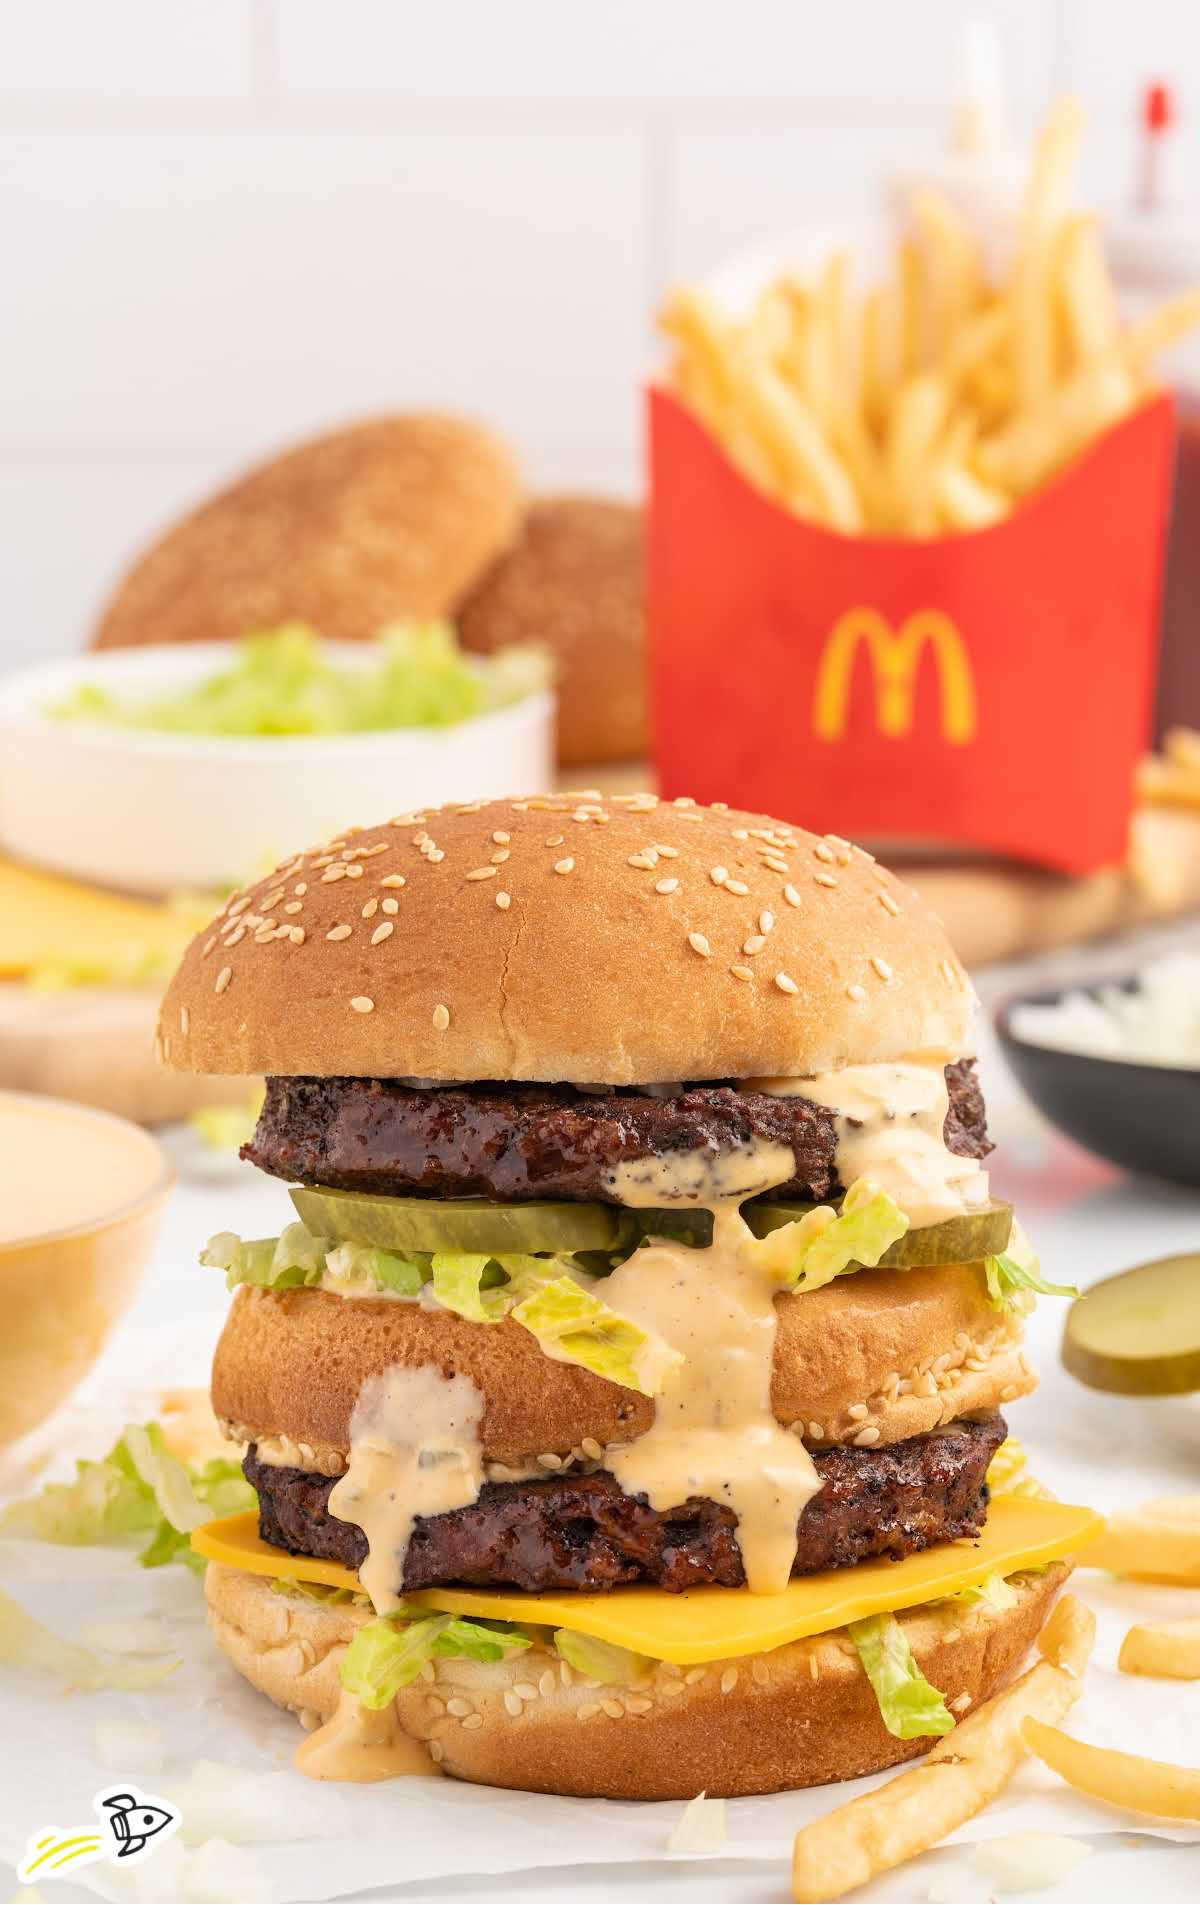 a burger with Big Mac Sauce and a side of fries